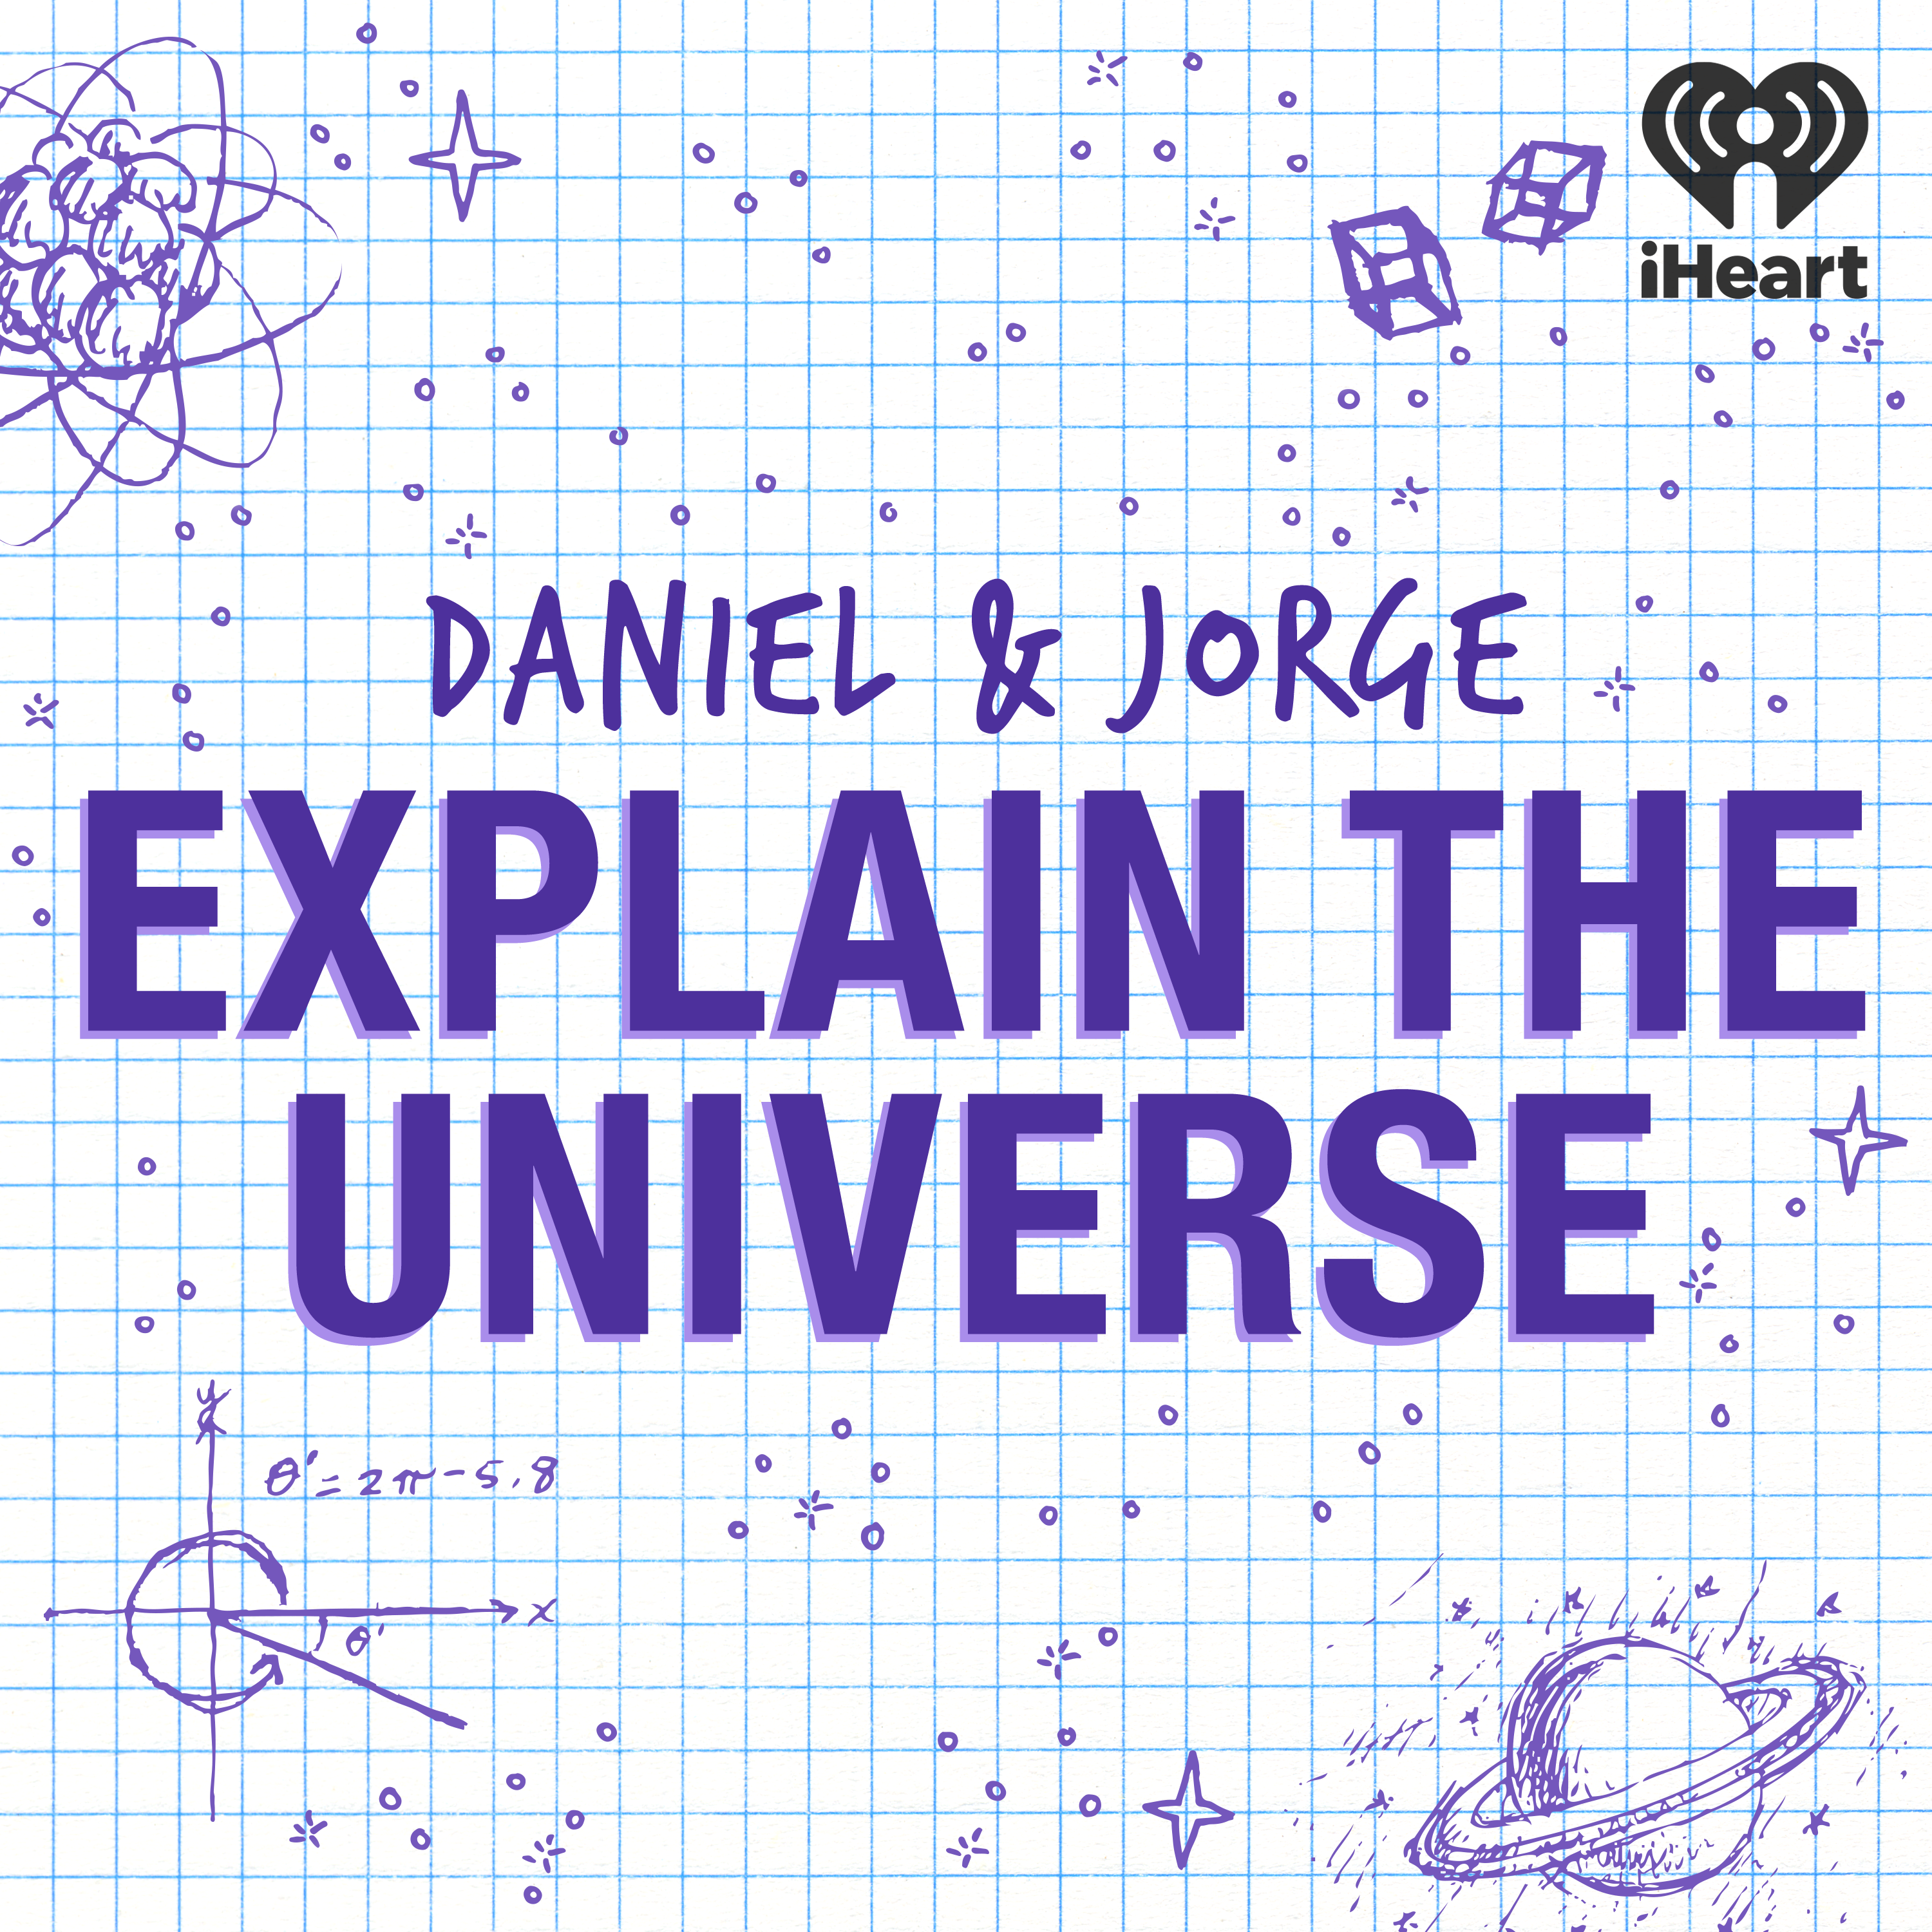 What did the early Universe sound like?